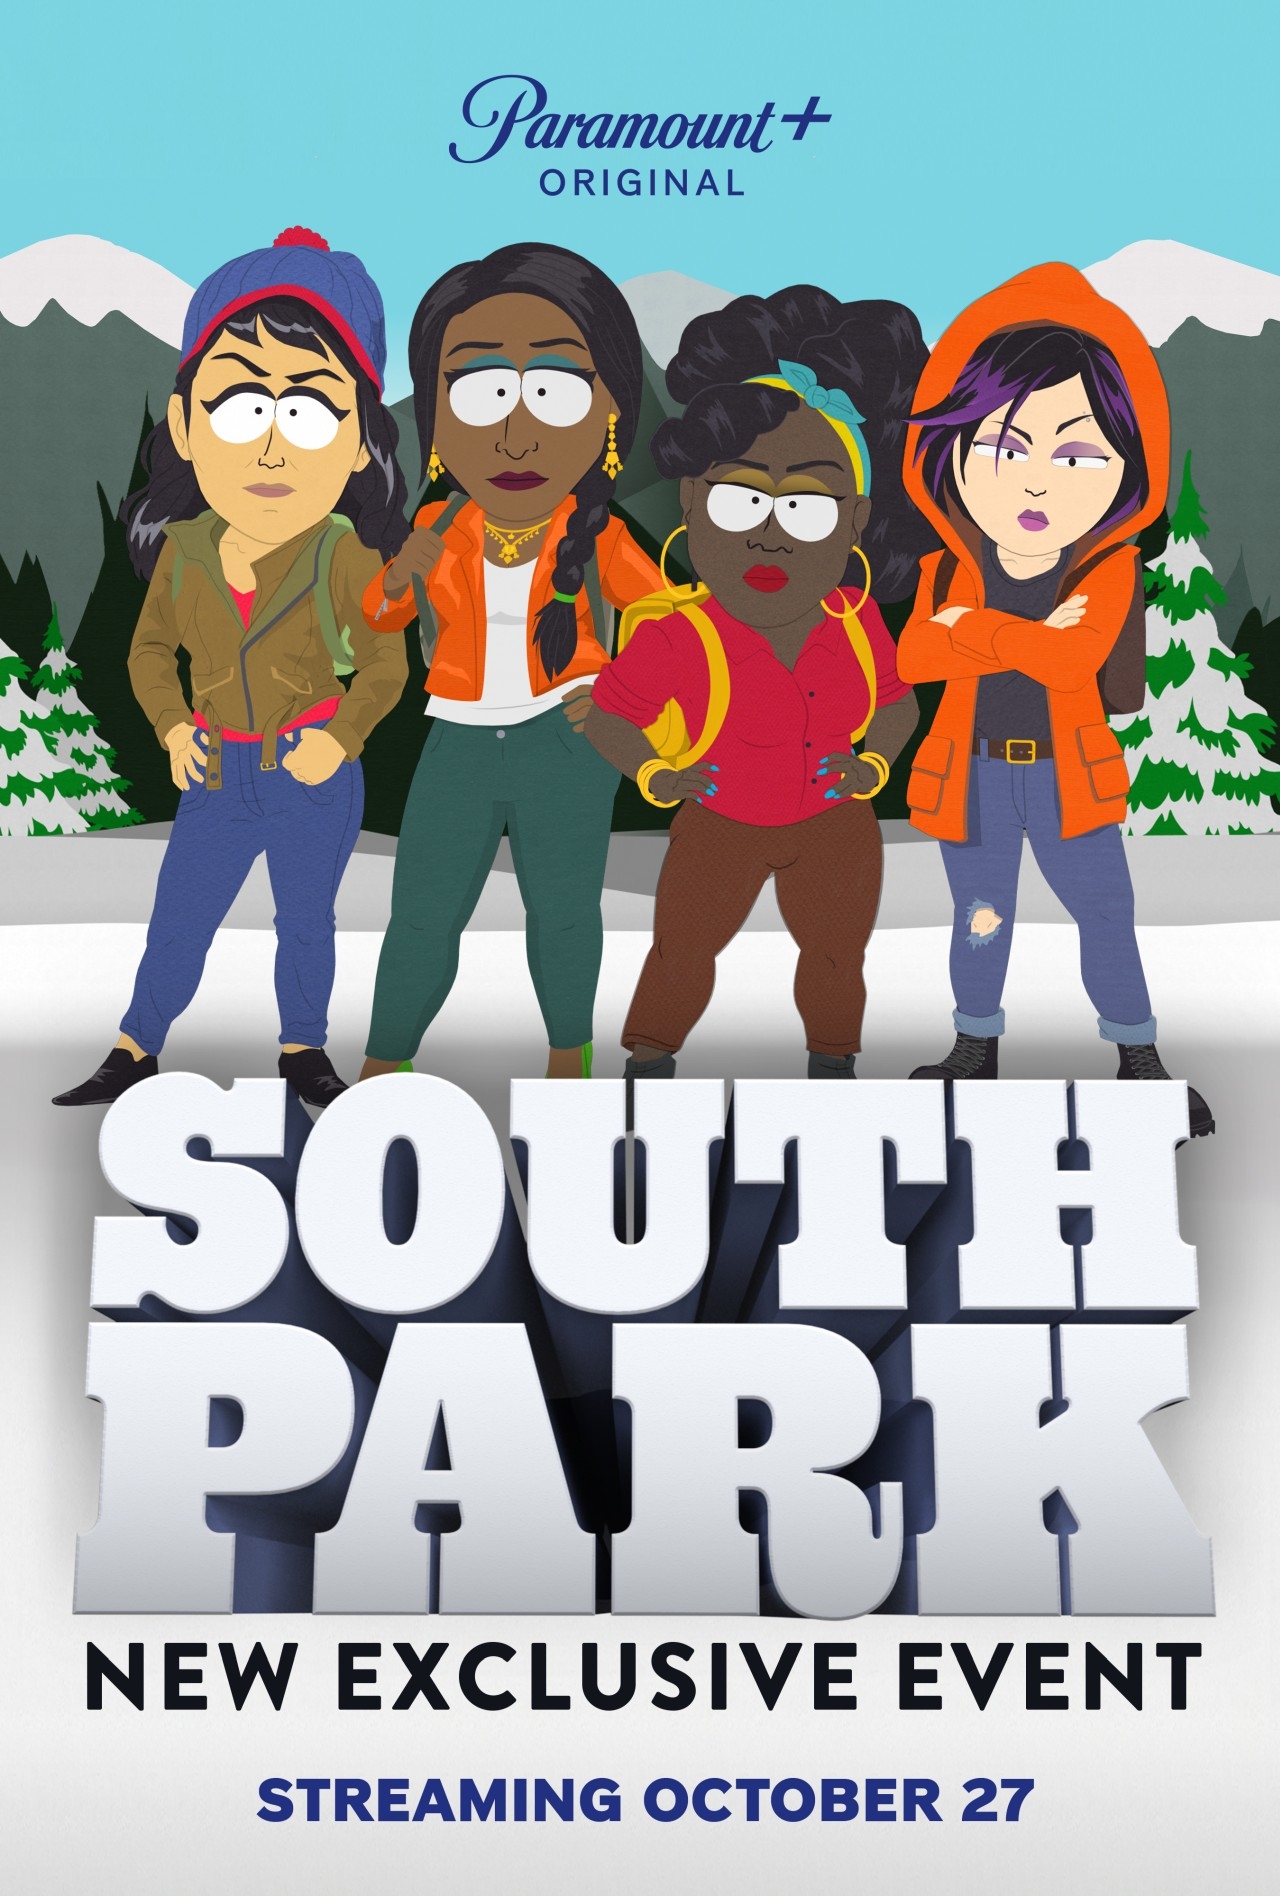 South Park: The Streaming Wars [DVD]